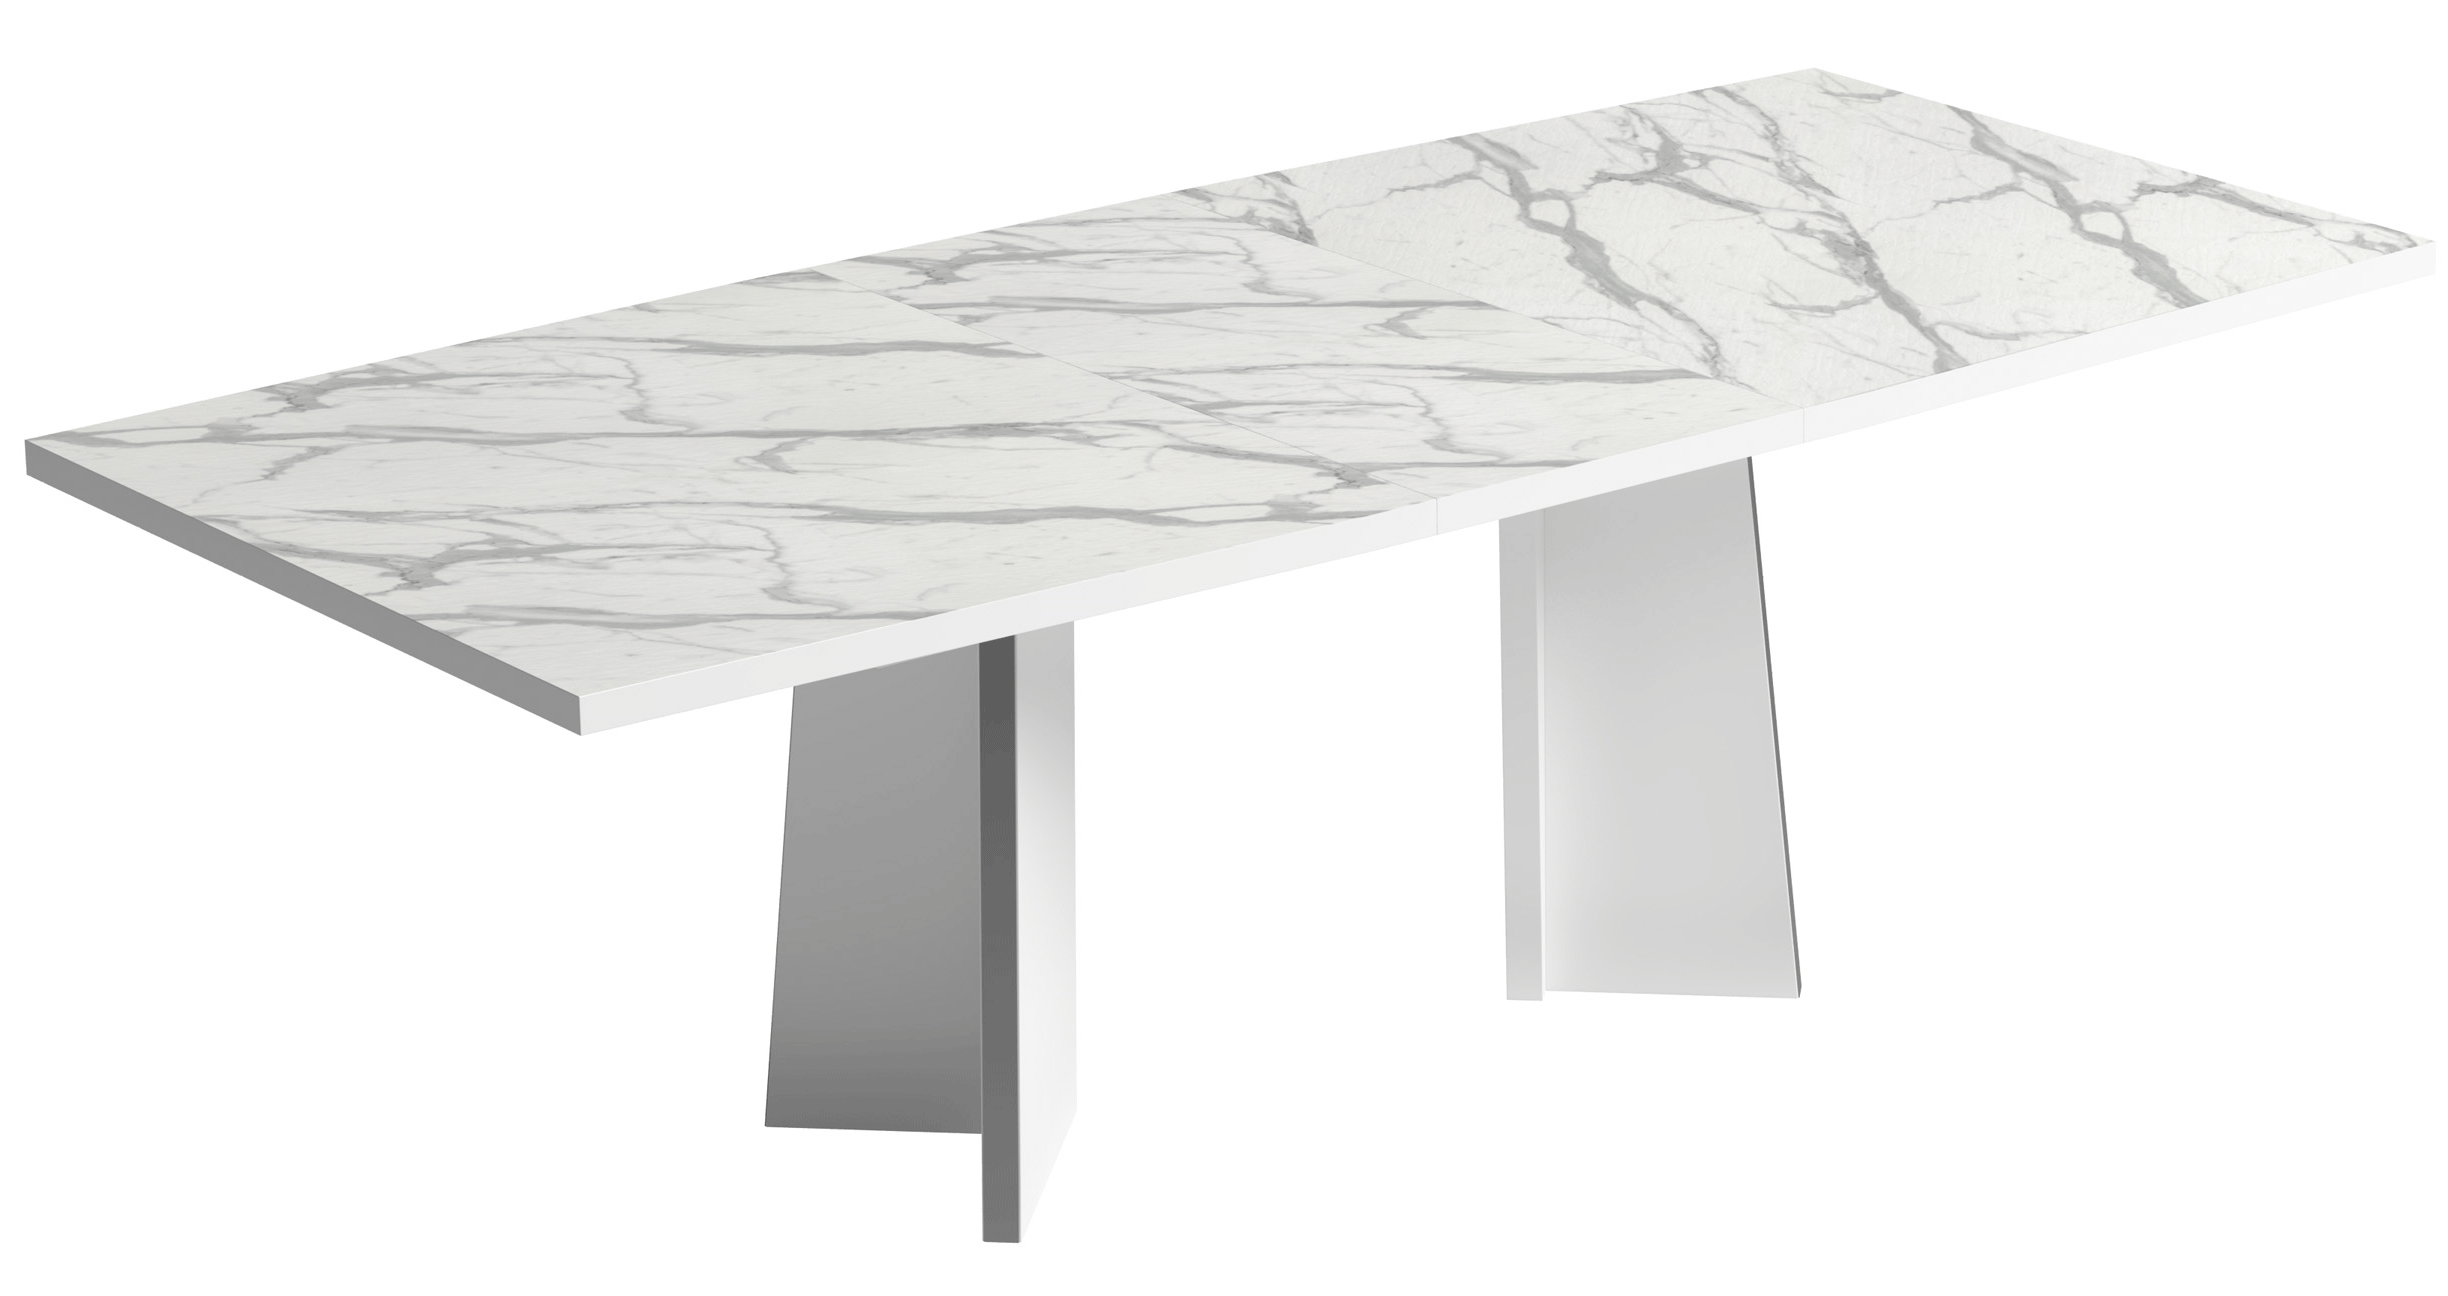 Dining Room Furniture Marble-Look Tables Carrara Dining Table